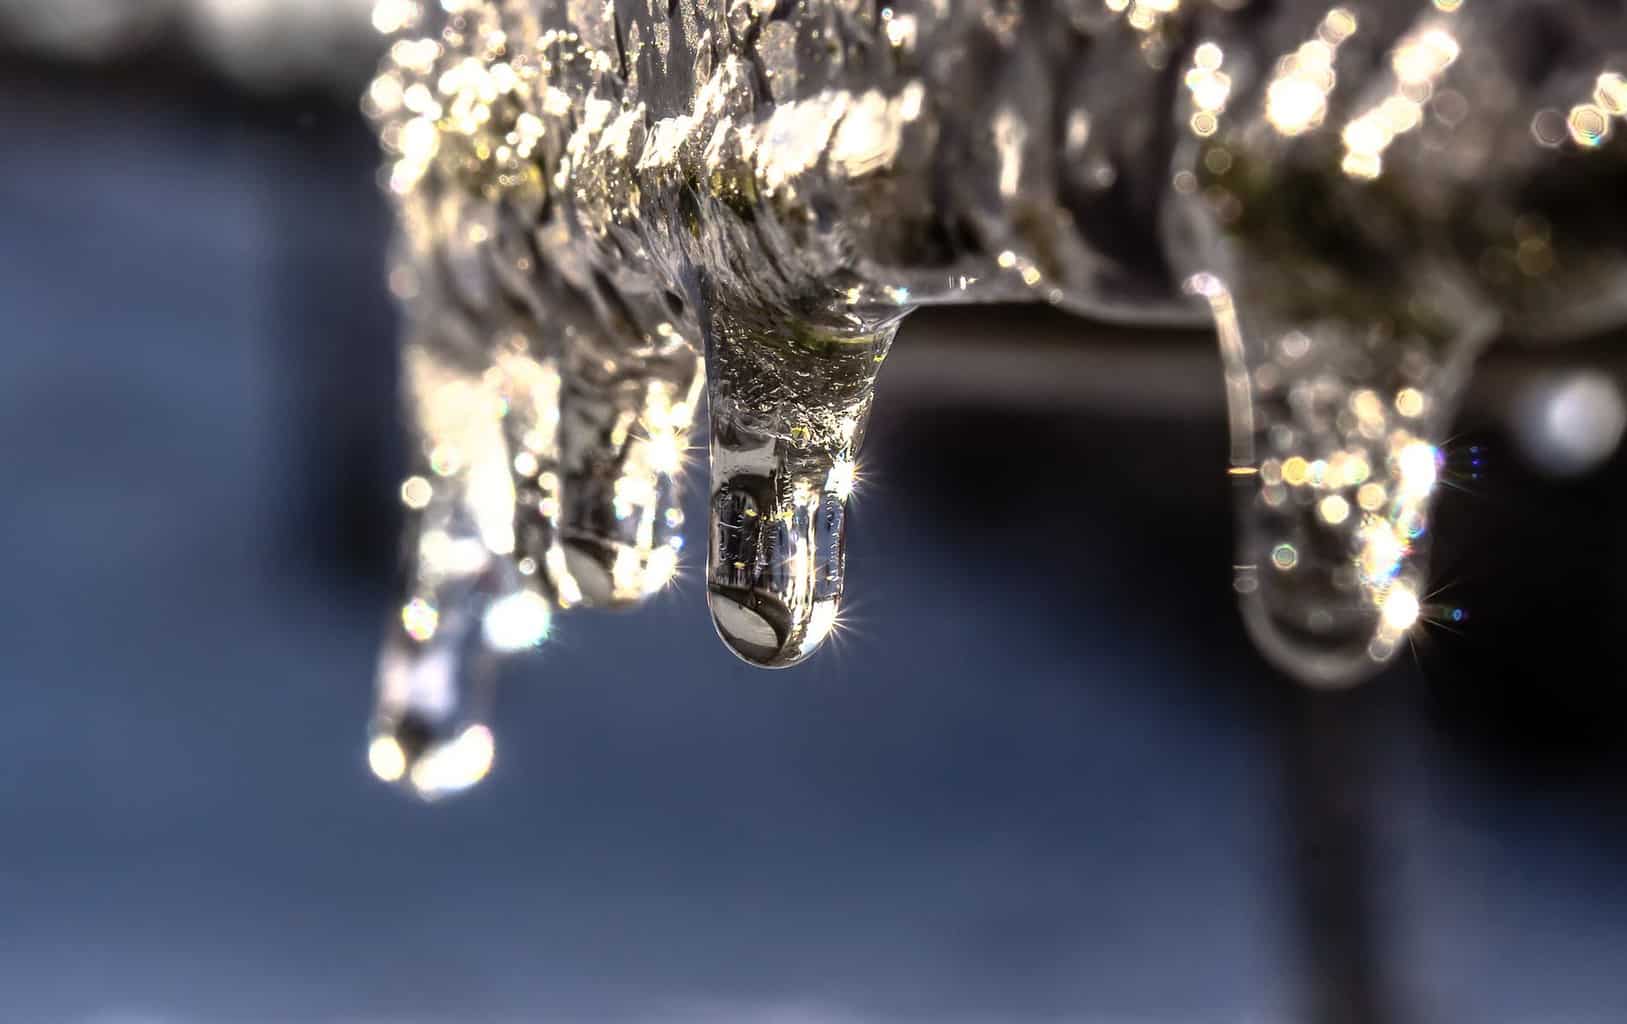 Frozen pipes